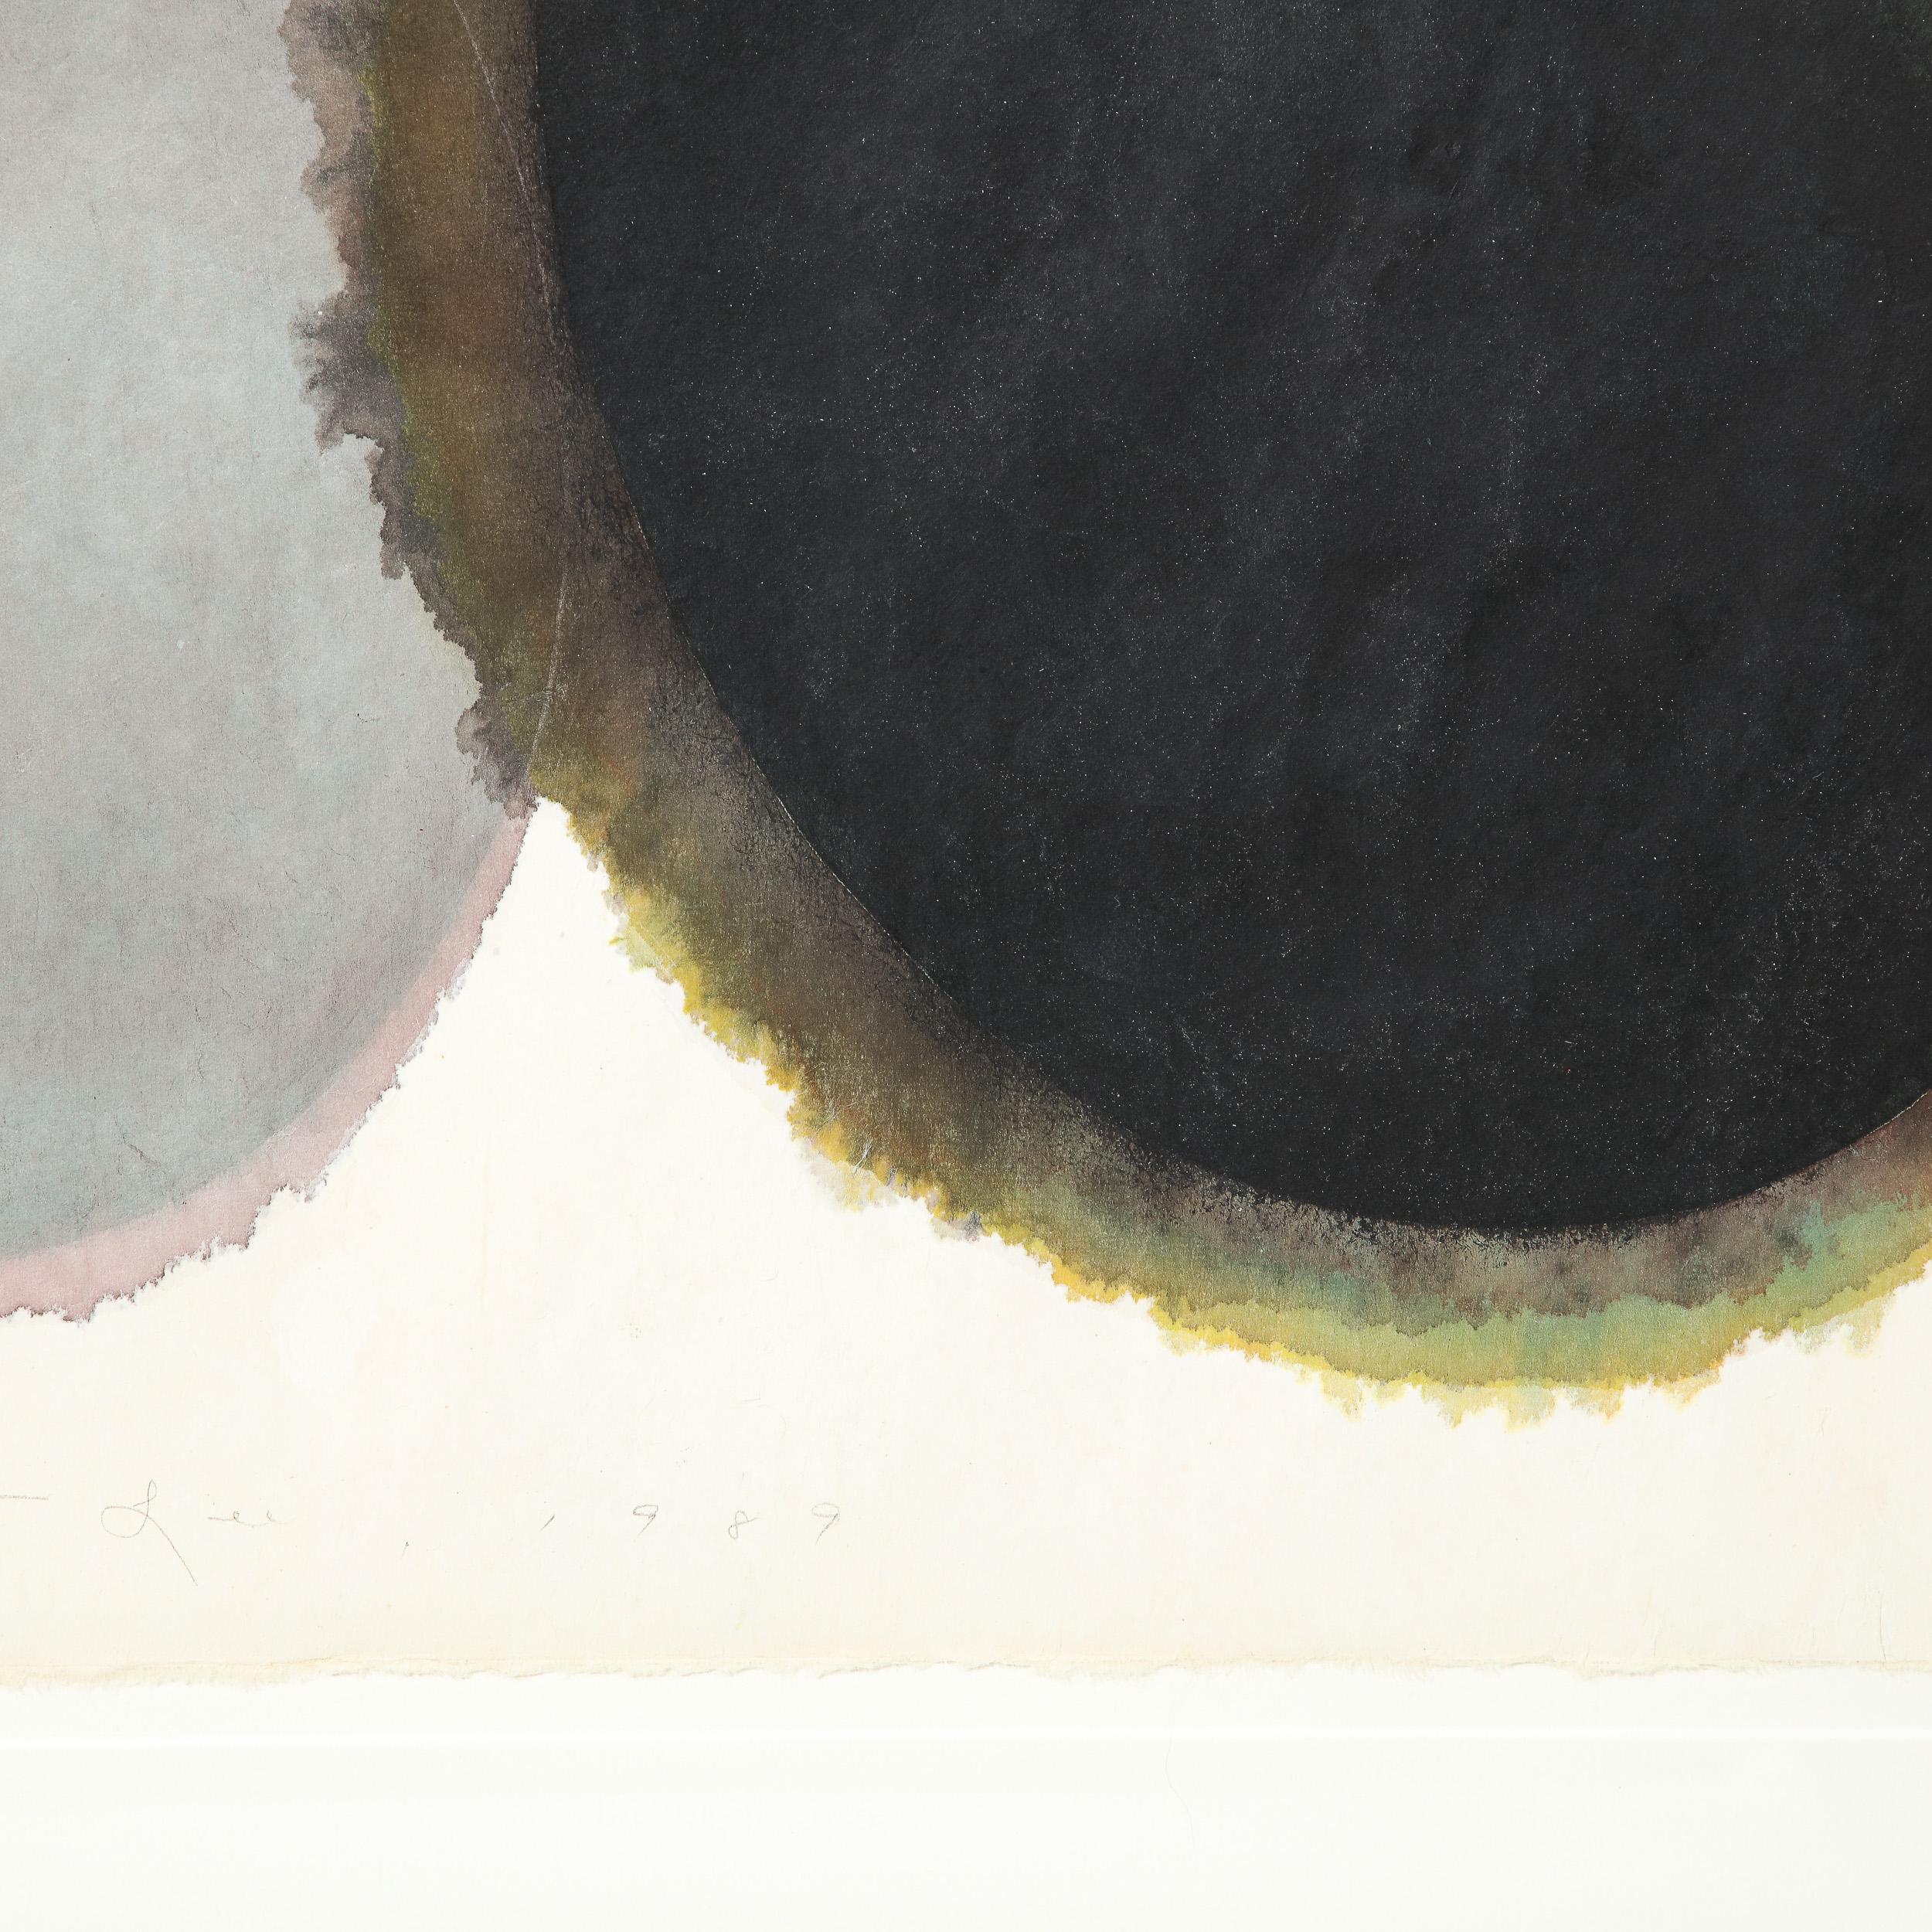 This elegant watercolor on paper, entitled“Two Black Eggs”,  was realized by the esteemed Korean artist Byoung Yong Lee in 1989. It features three overlapping ovoid forms, representing abstracted interpretations of bird eggs. The outer two ovoid